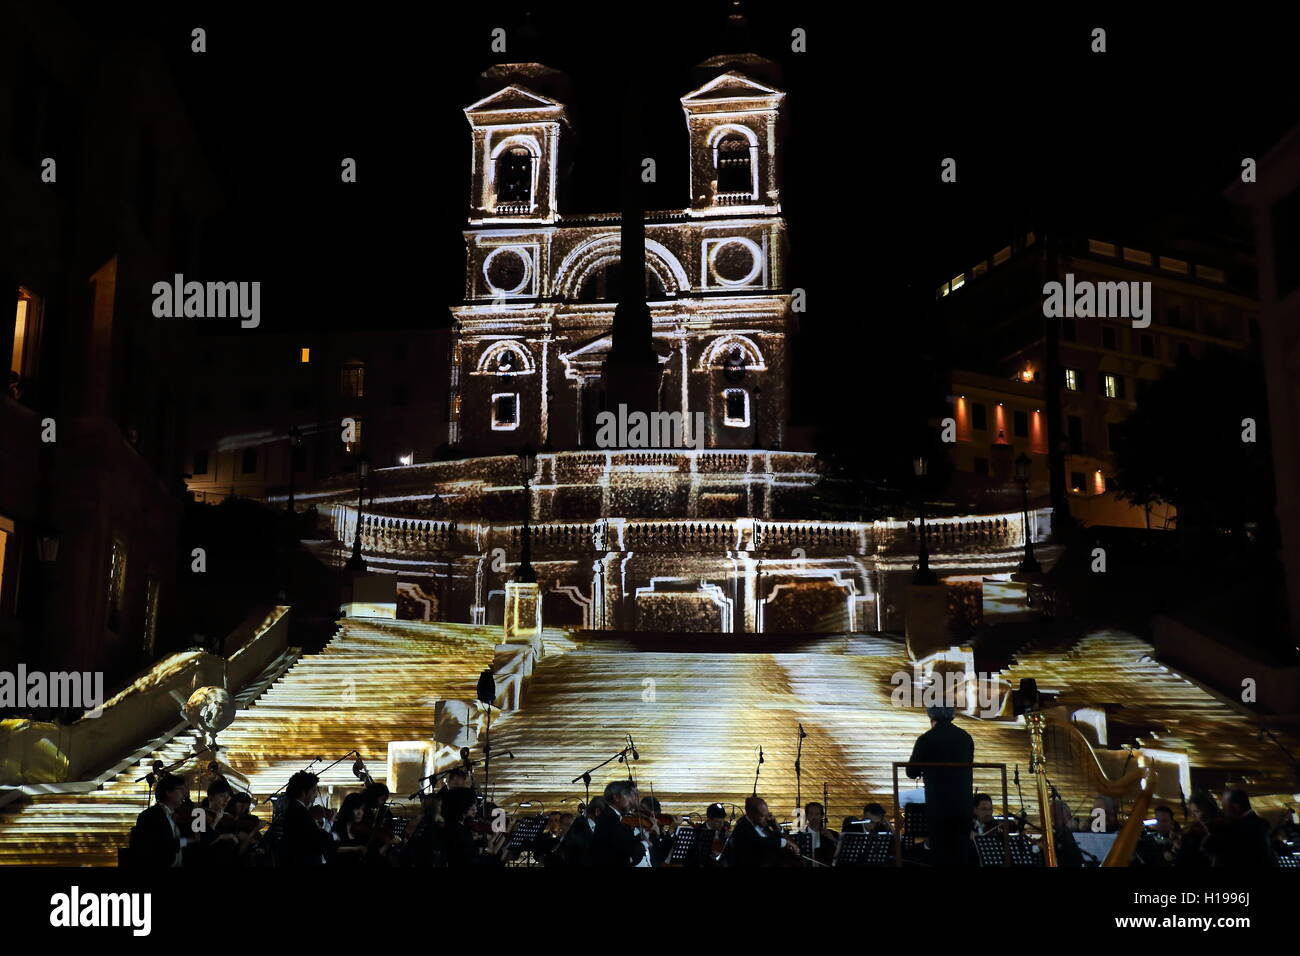 Roma, Italy. 22nd Sep, 2016. Reopening Spanish Steps after restoration work, with a show and a concert by the National Academy of Santa Cecilia conducted by Antonio Pappano, and the fireworks on the Spanish Steps © Matteo Nardone/Pacific Press/Alamy Live News Stock Photo